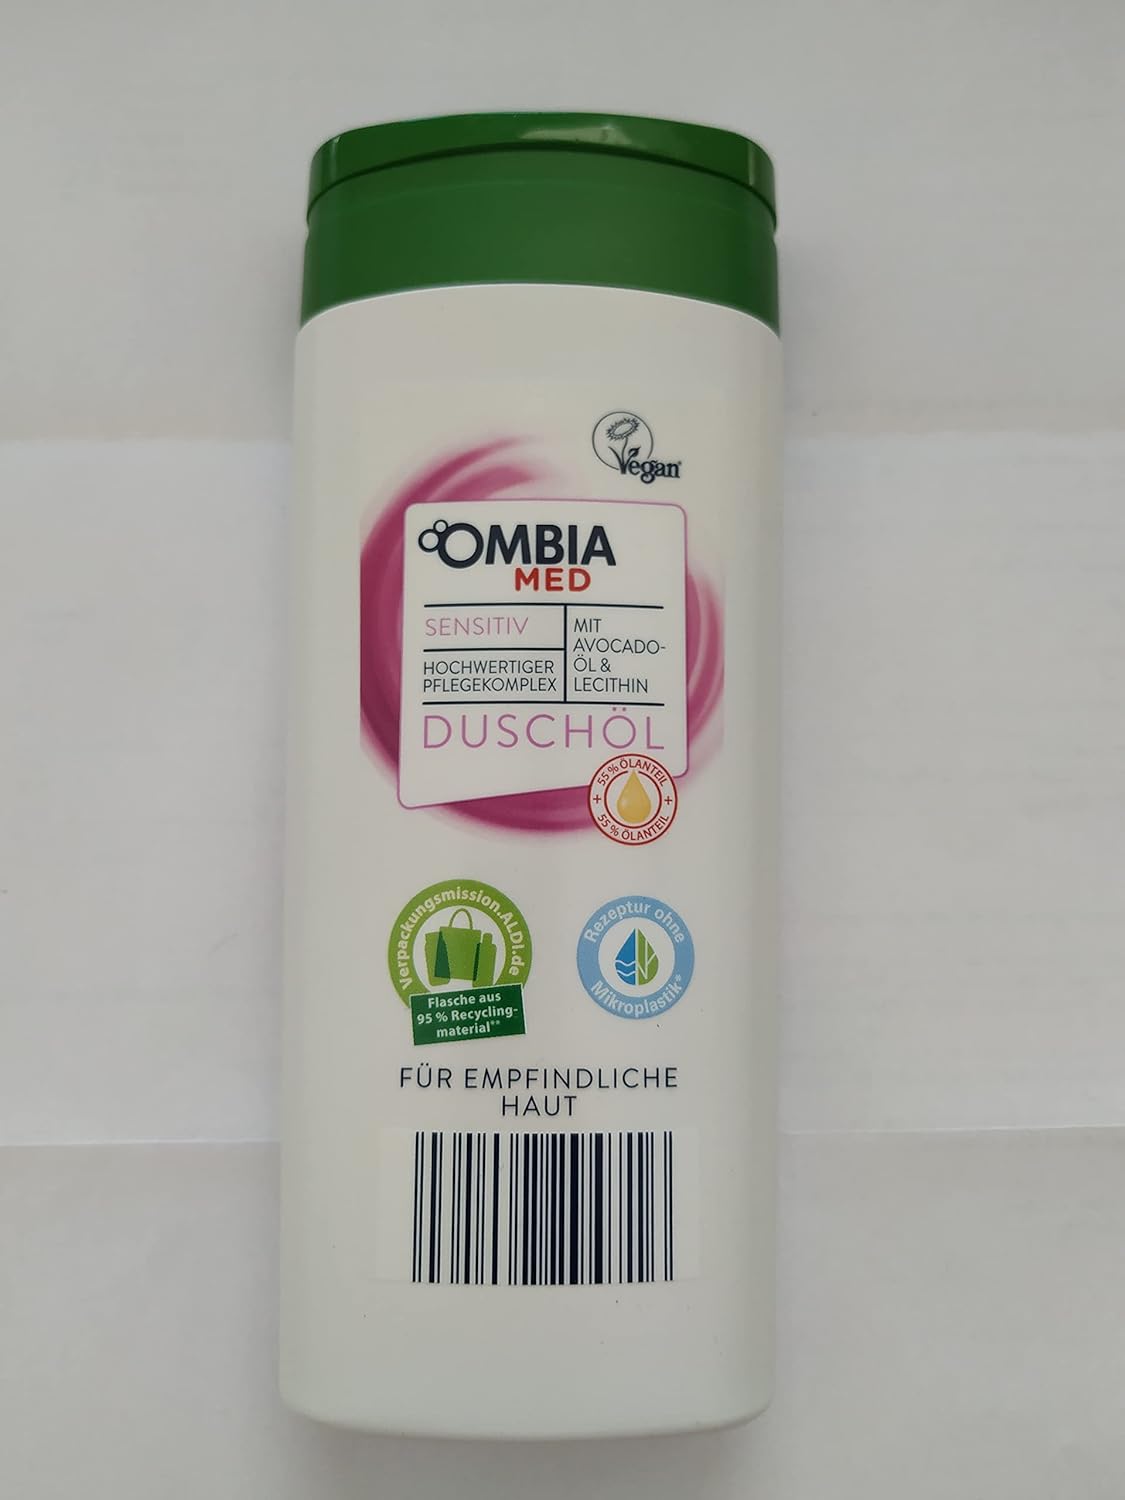 OMBIA med Shower Oil Sensitive with Avocado Oil & Lecithin 250 ml